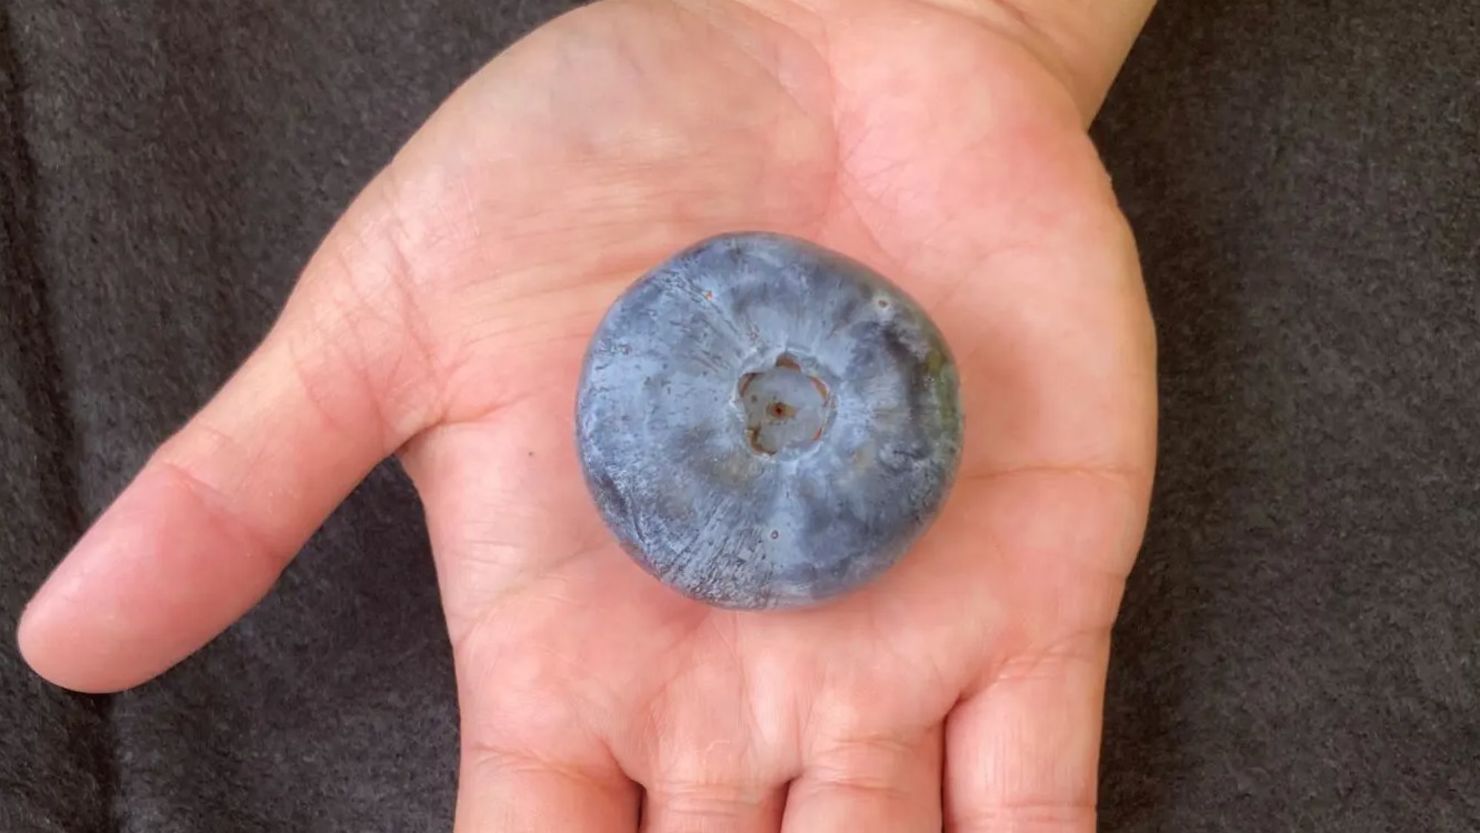 The blueberry is now officially the world's heaviest.